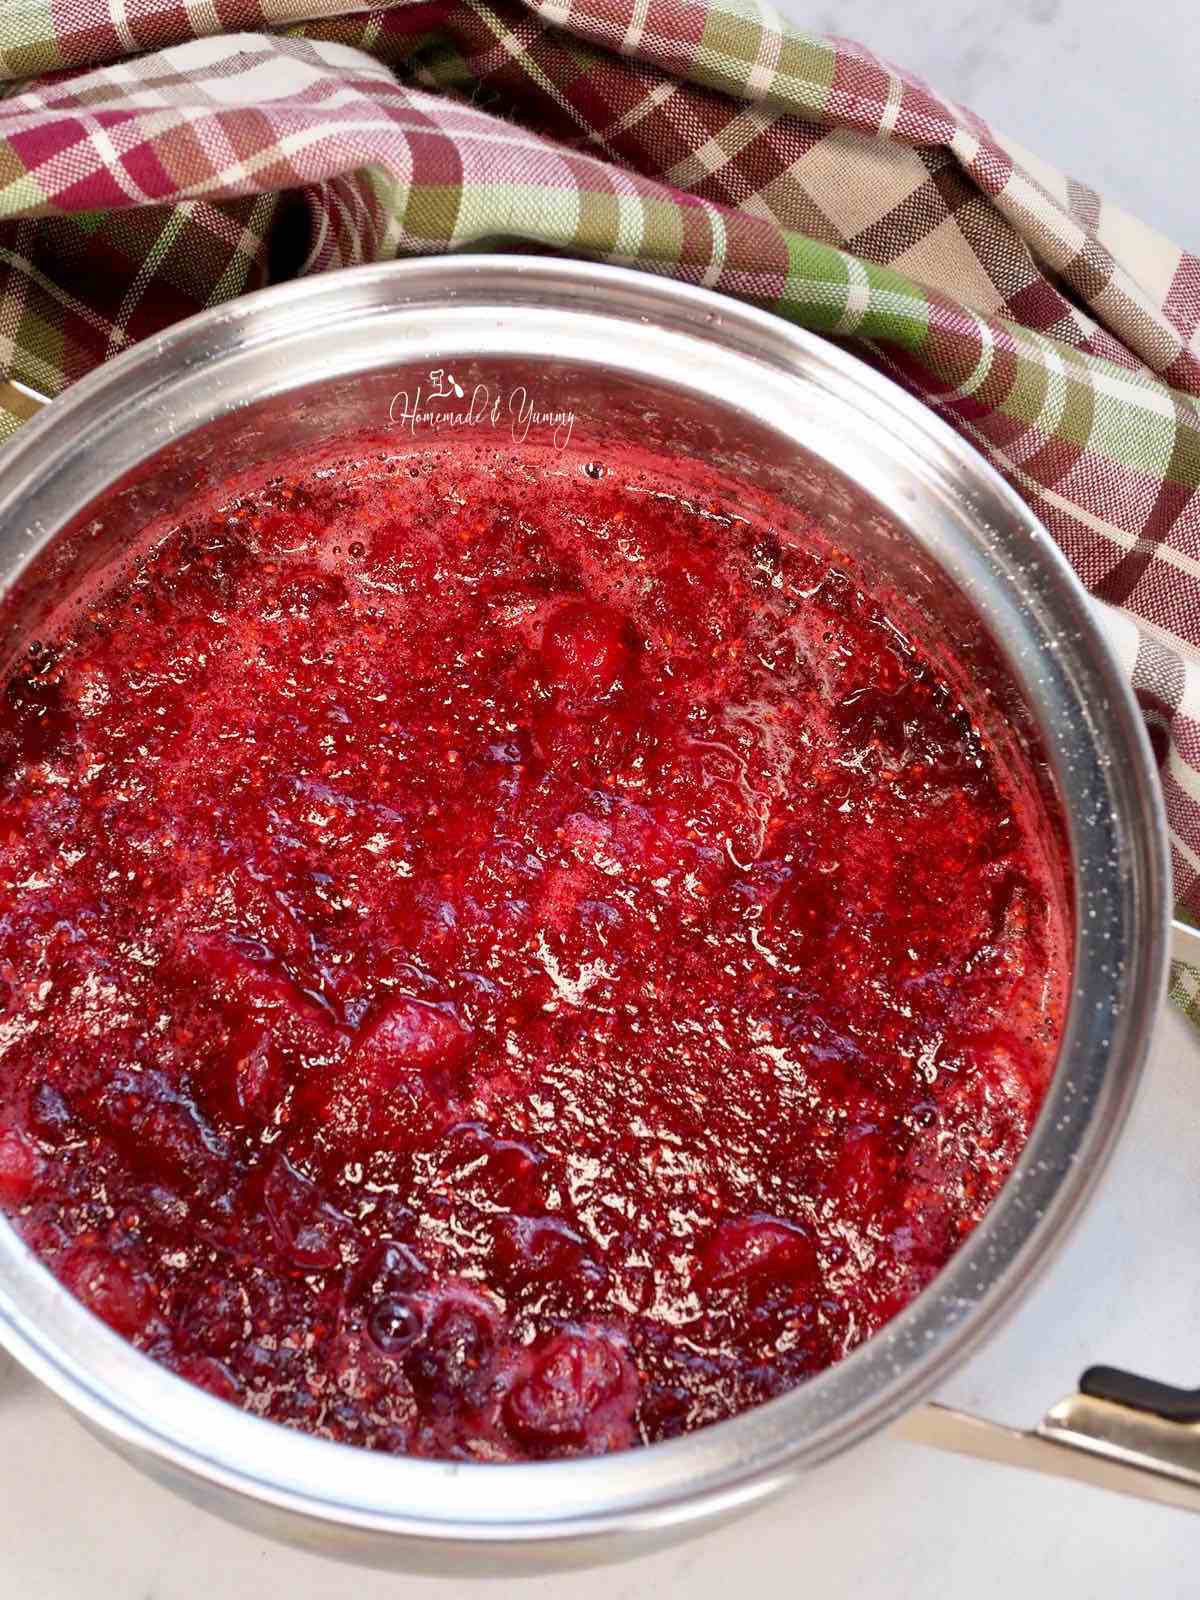 A pot of sauce made from cranberries.